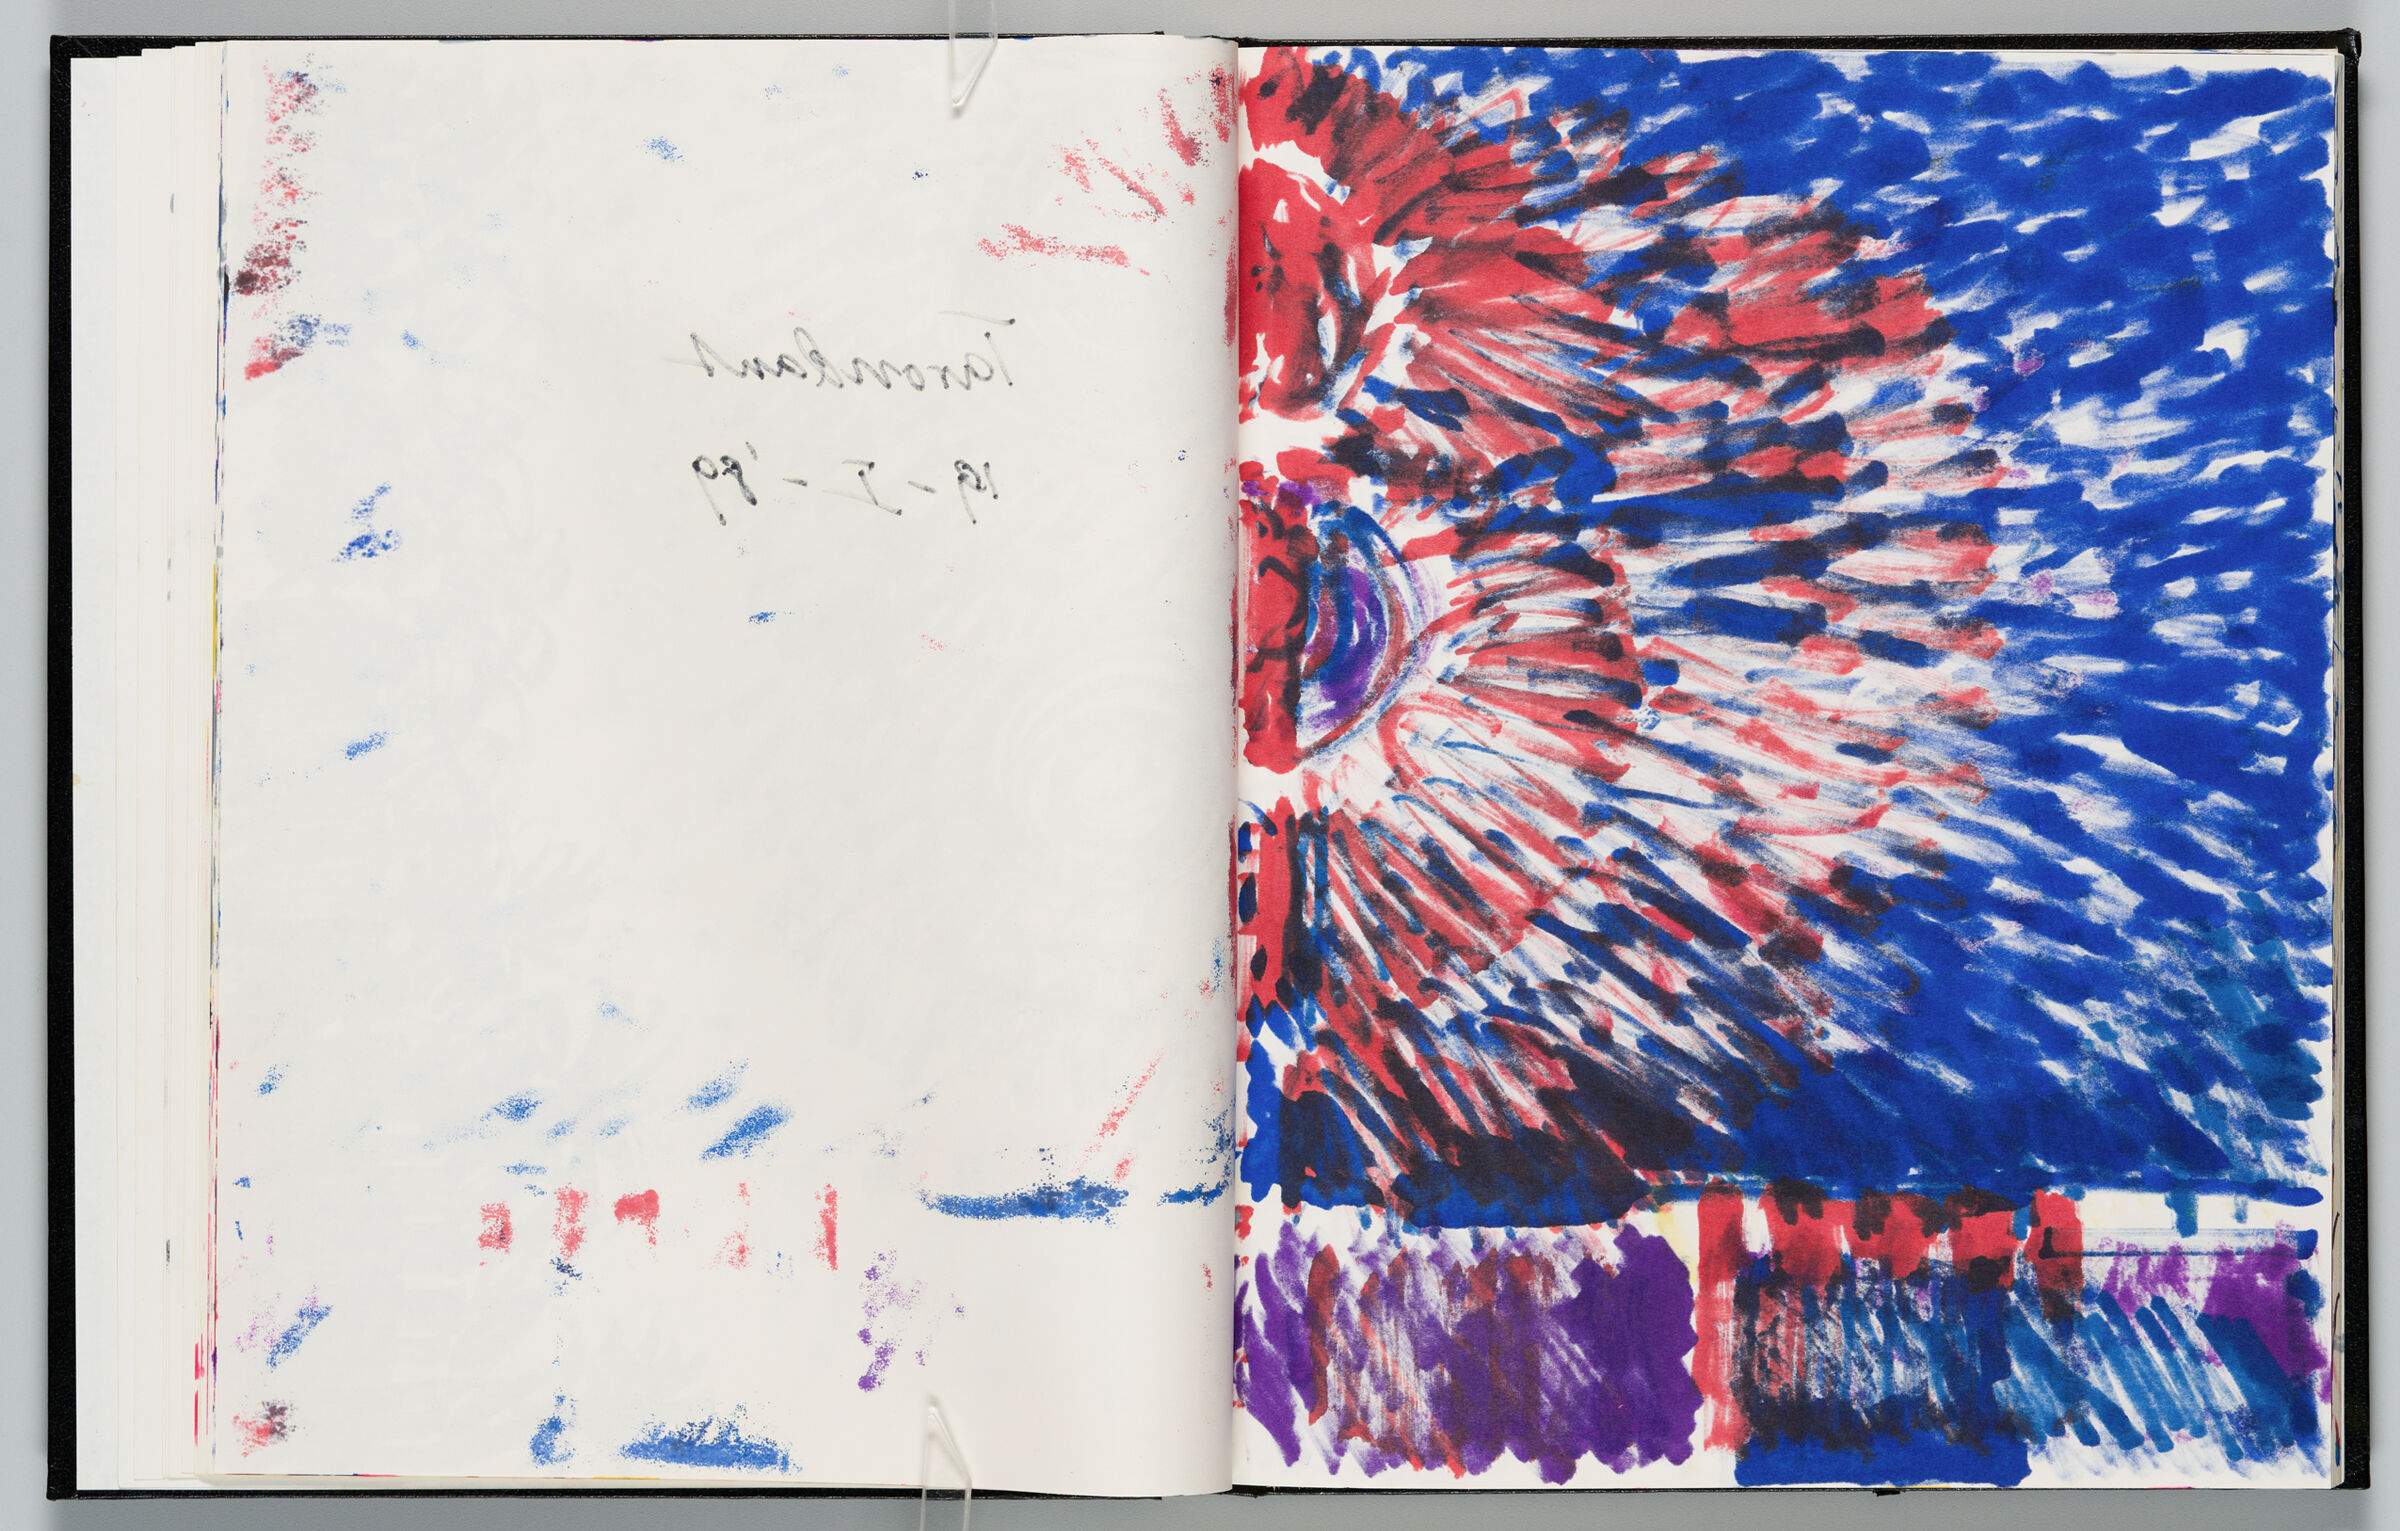 Untitled (Bleed-Through Of Previous Page, Left Page); Untitled (View Of Taroundant With Star/Sun Bursts, Right Page)